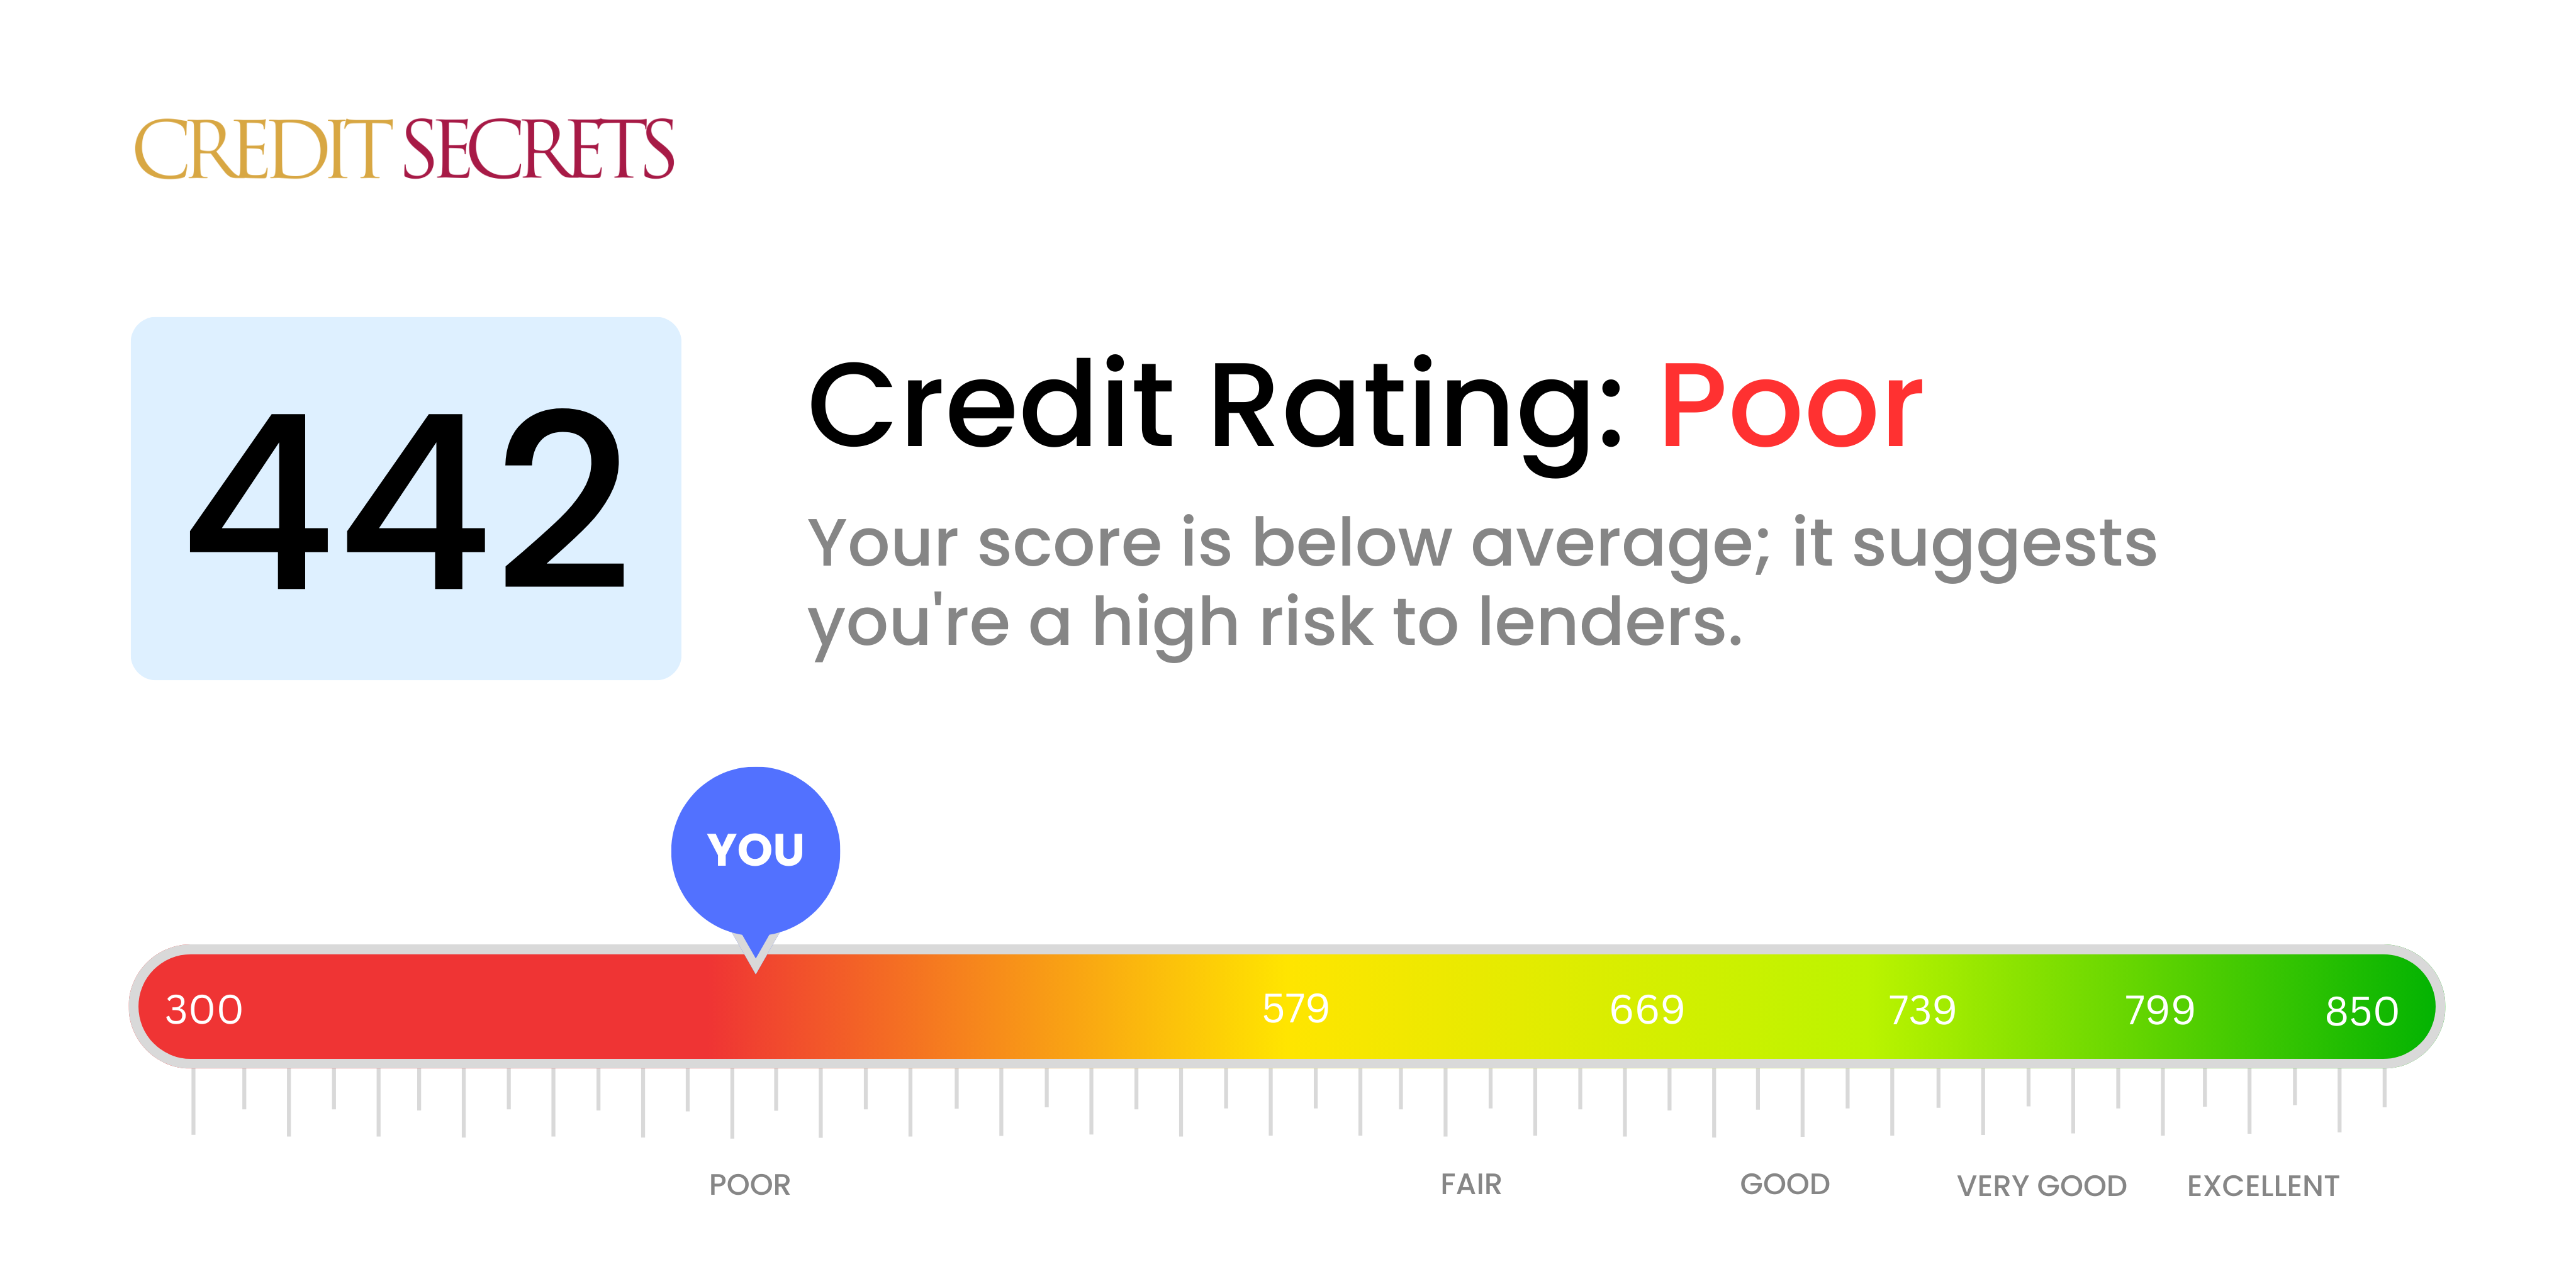 Is 442 a good credit score?